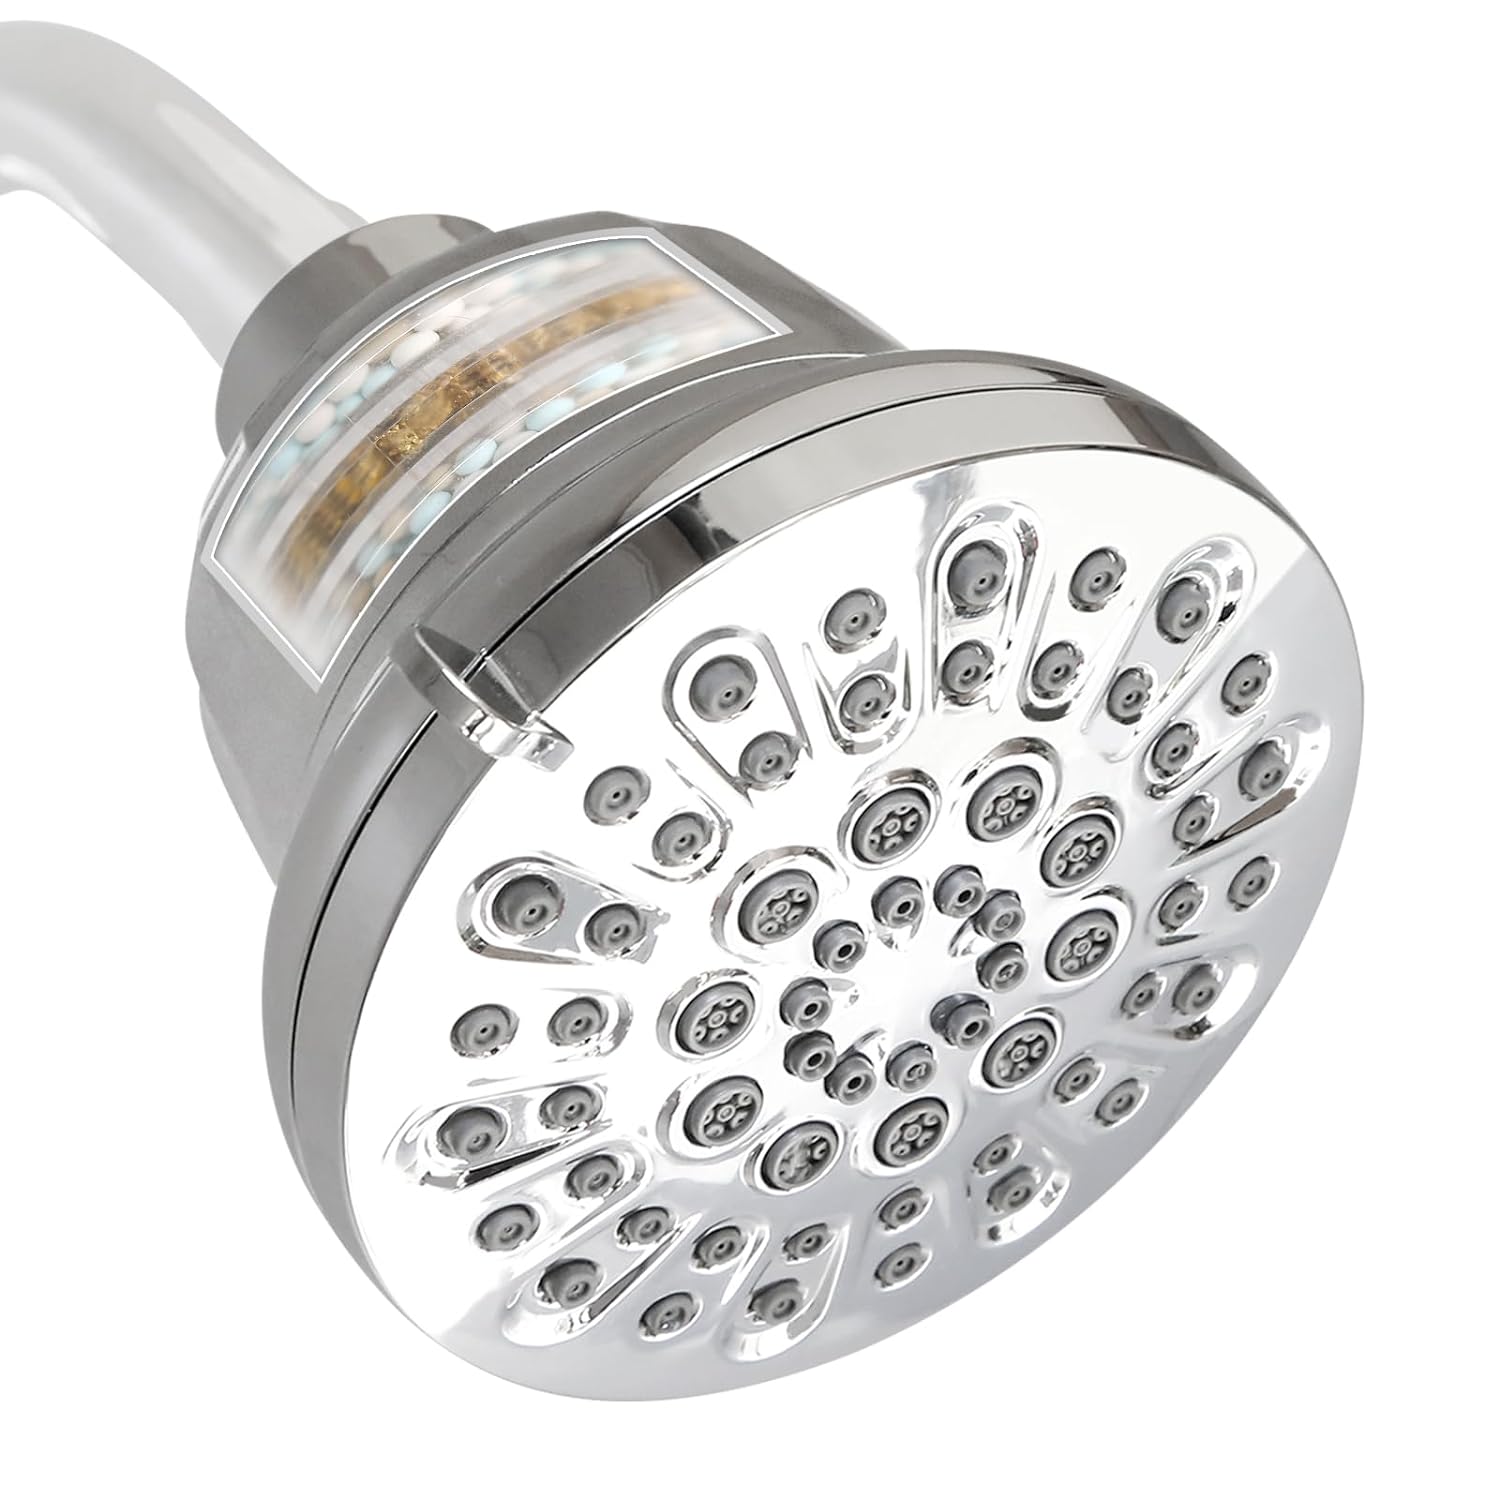 INEFATH High Pressure Shower Head 15 Stage Filtered Shower Head - 5 modes Shower Head Filter for Hard Water for Remove Chlorine - 360°Adjusted